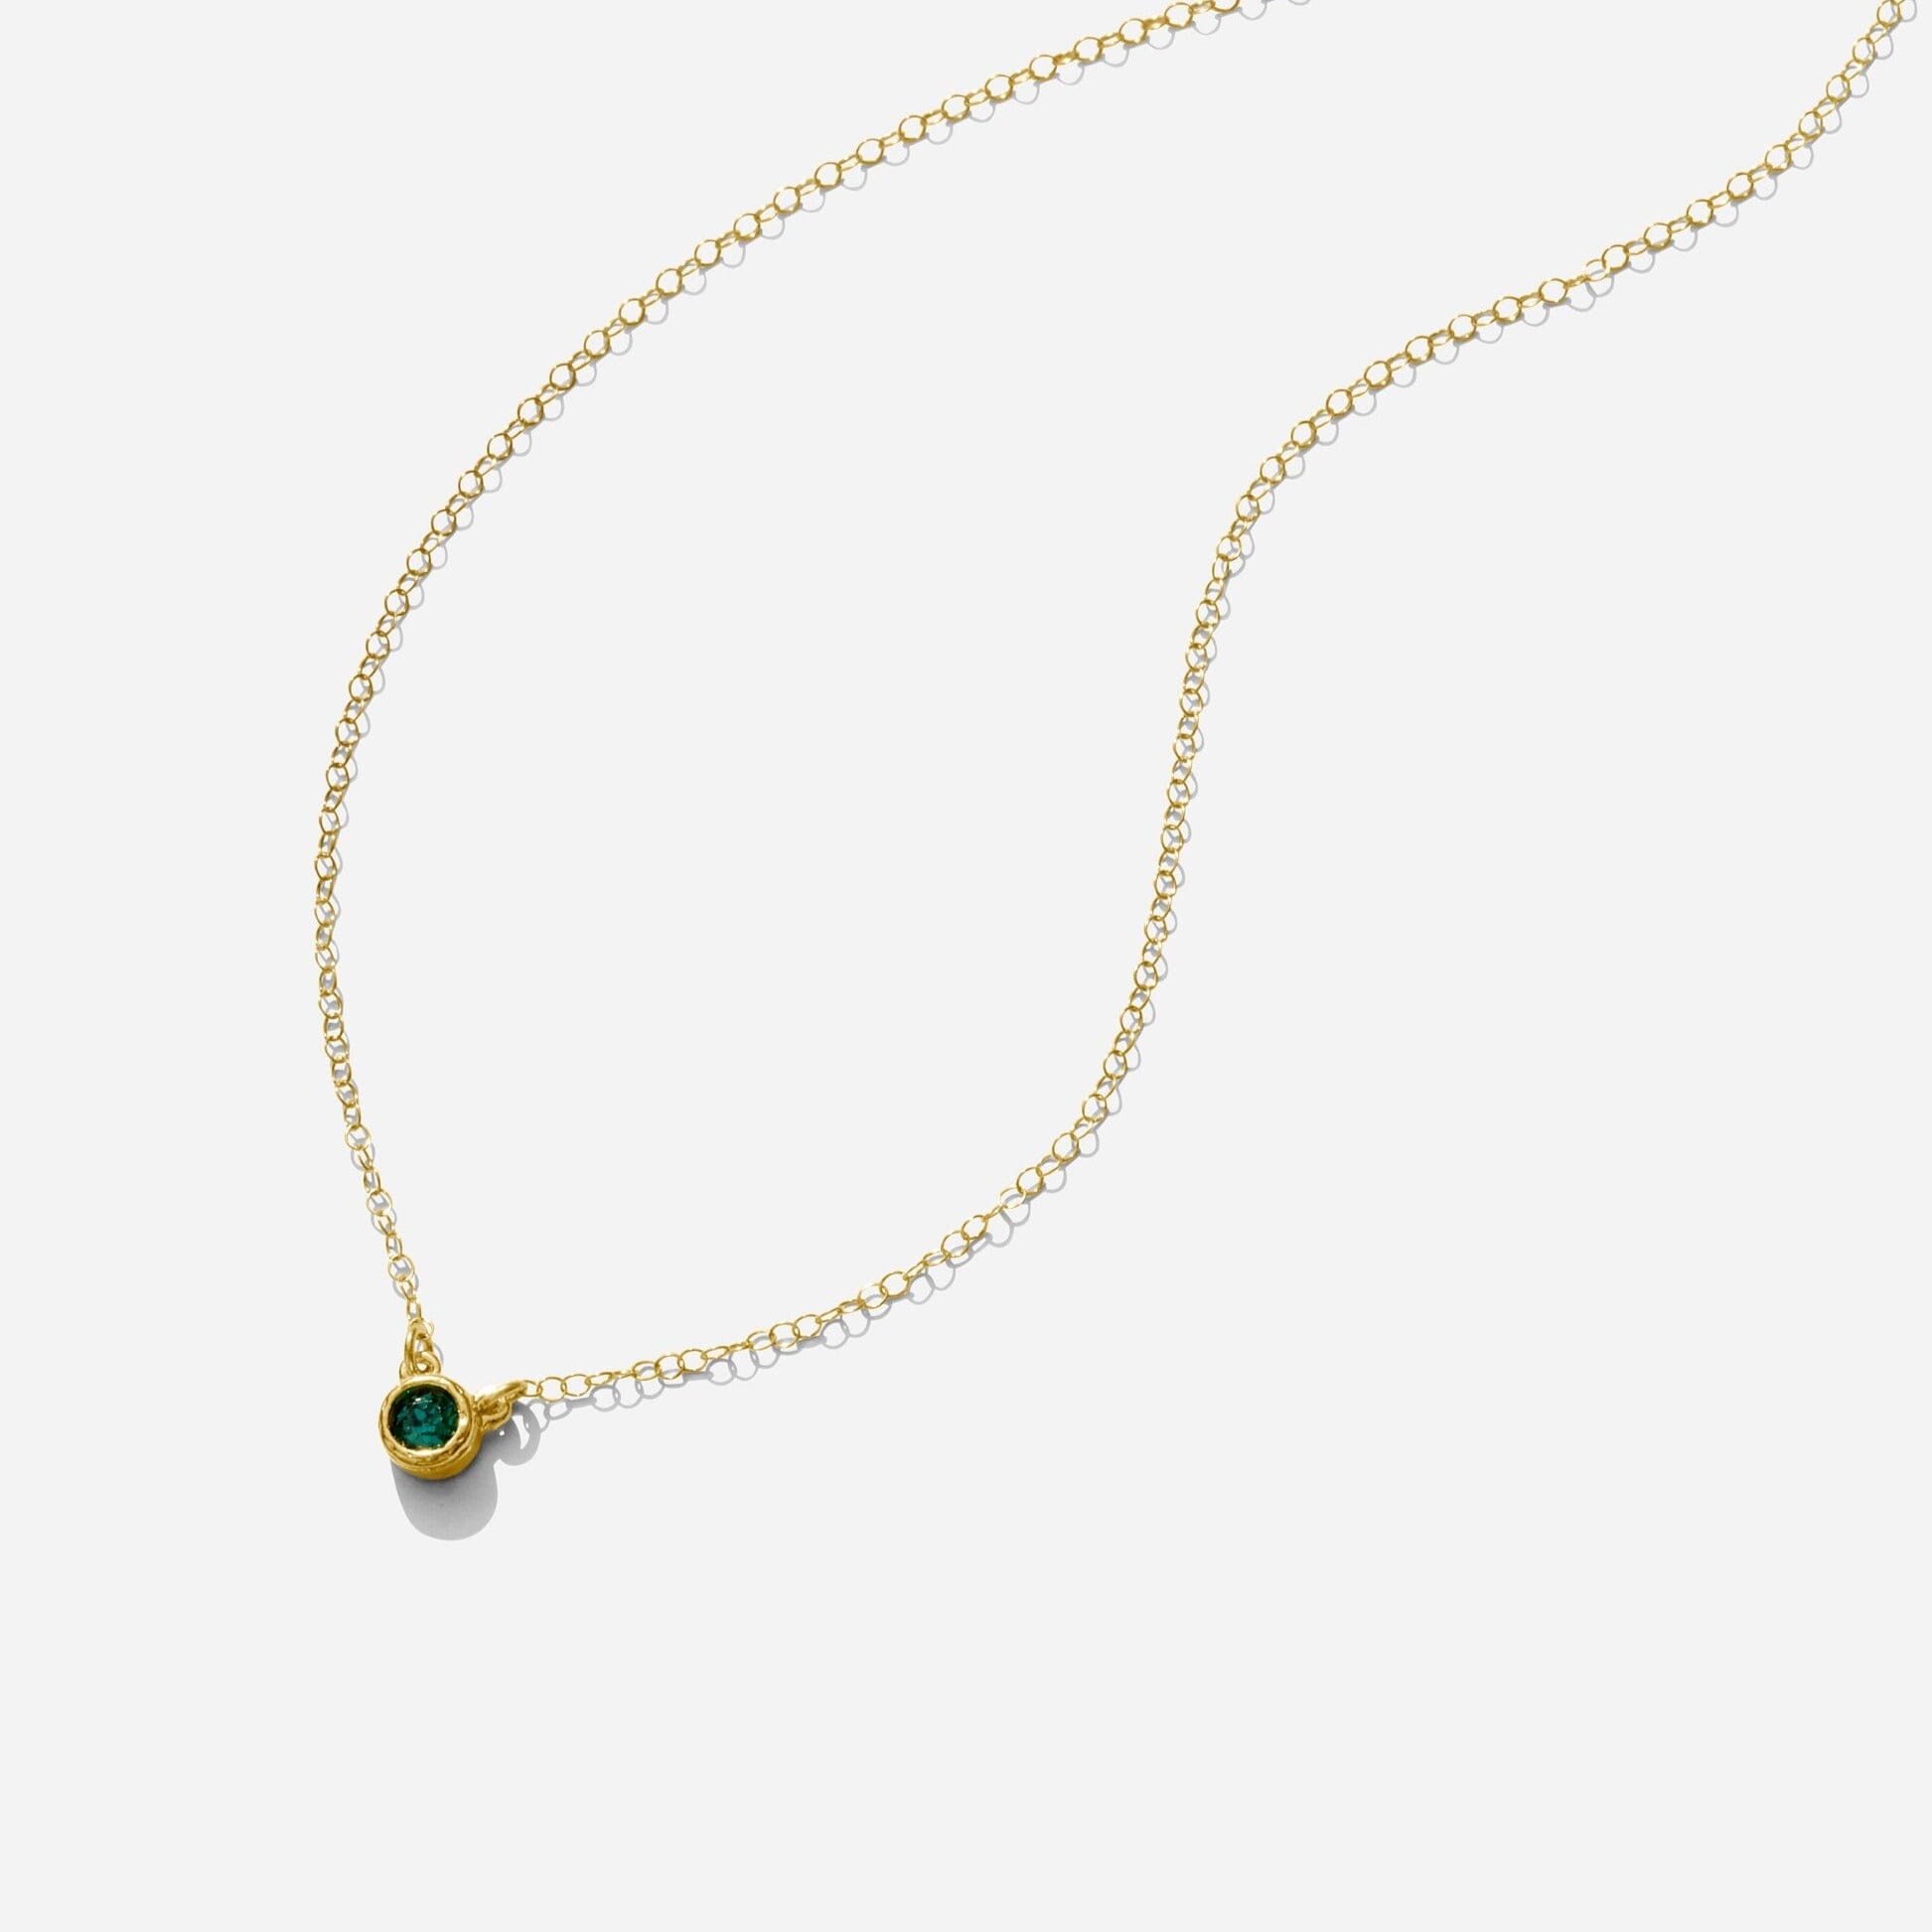 Gold May Emerald Birthstone Necklace handmade in America by Katie Dean Jewelry, as seen on a natural white background, perfect for the dainty minimal jewelry lovers.